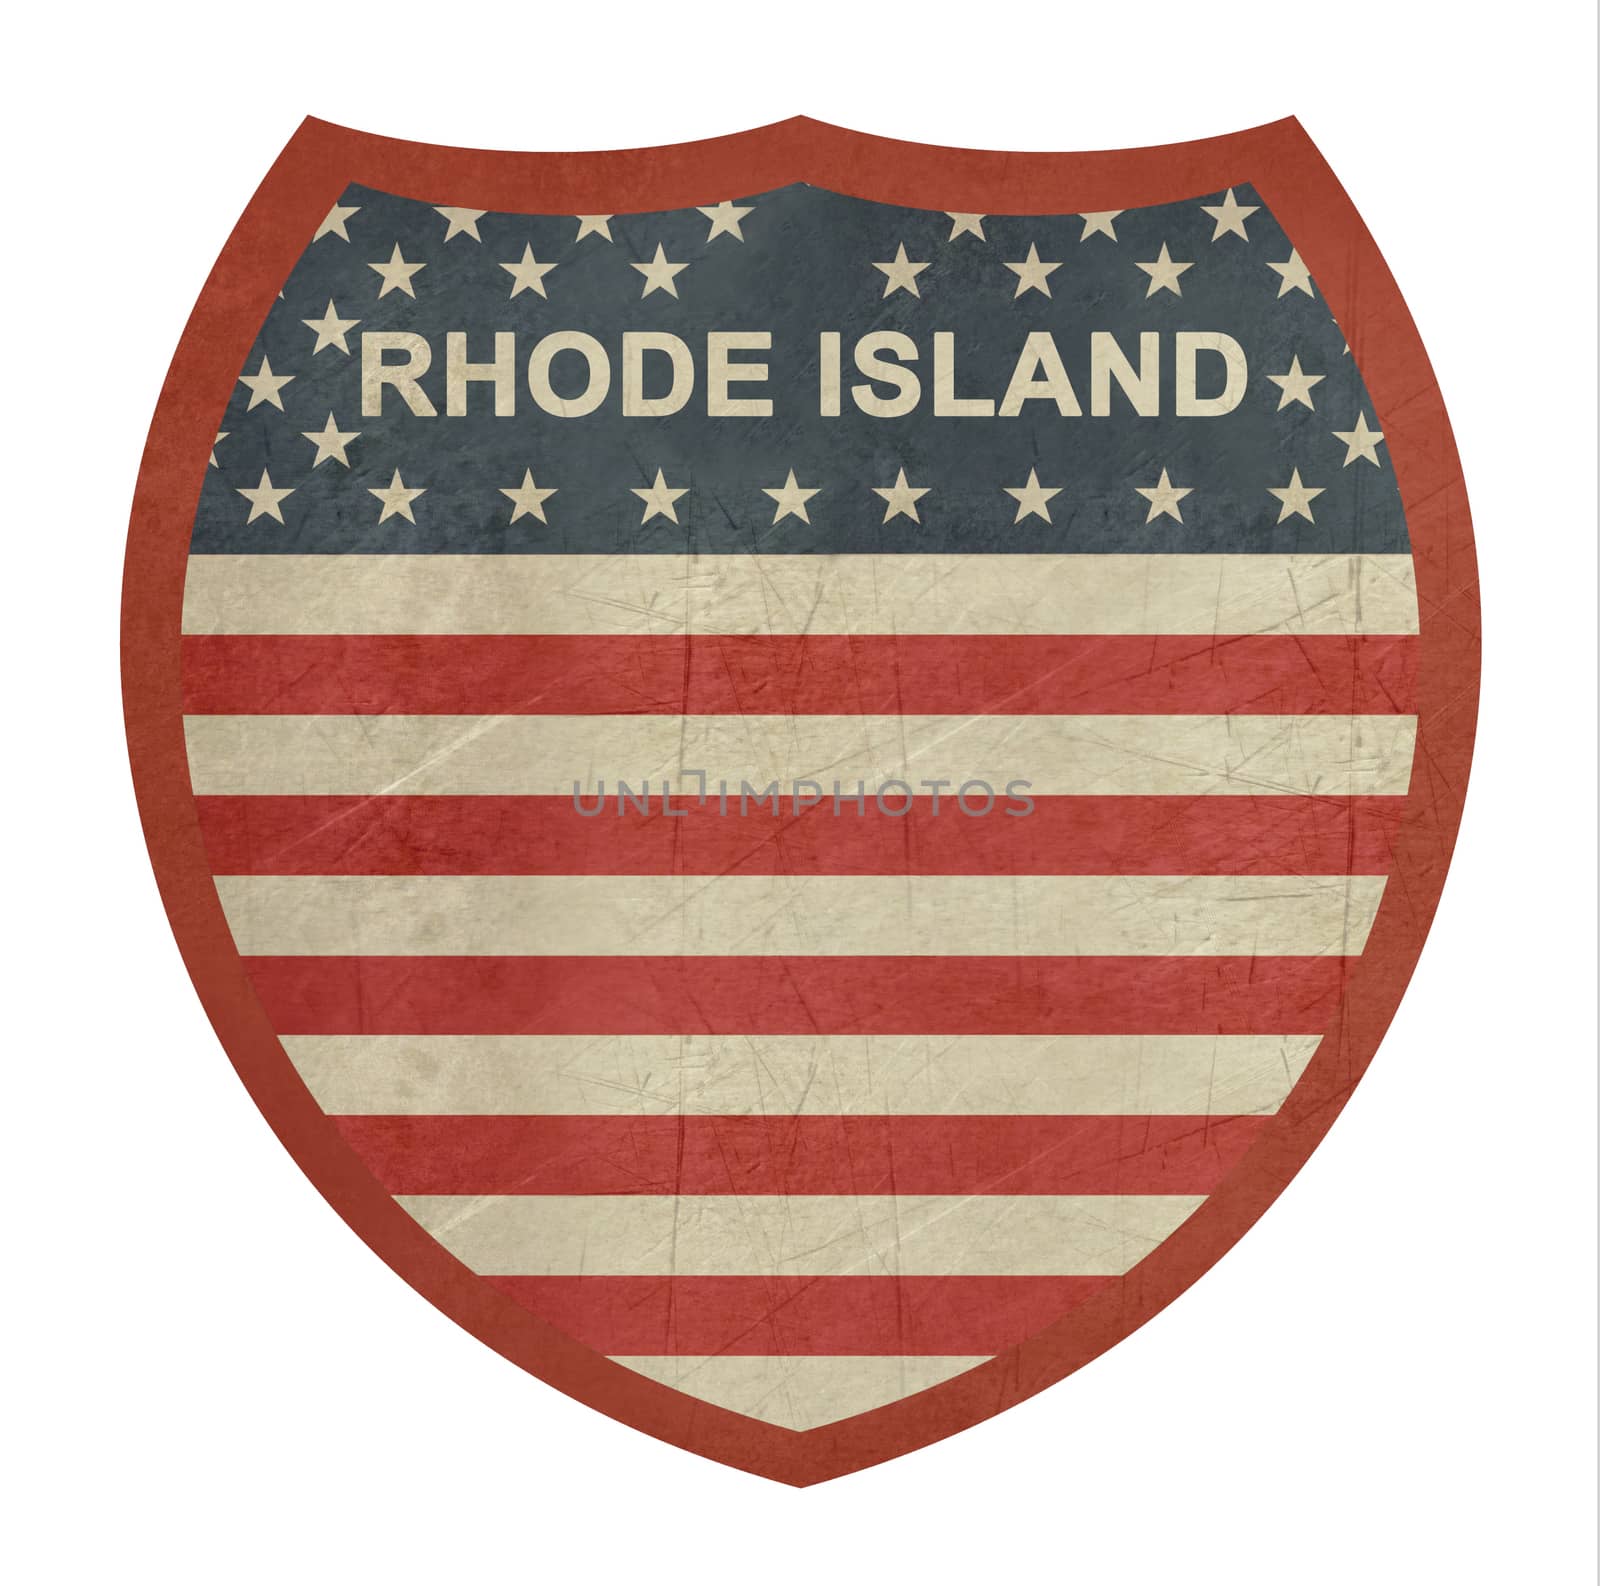 Grunge Rhode Island American interstate highway sign isolated on a white background.